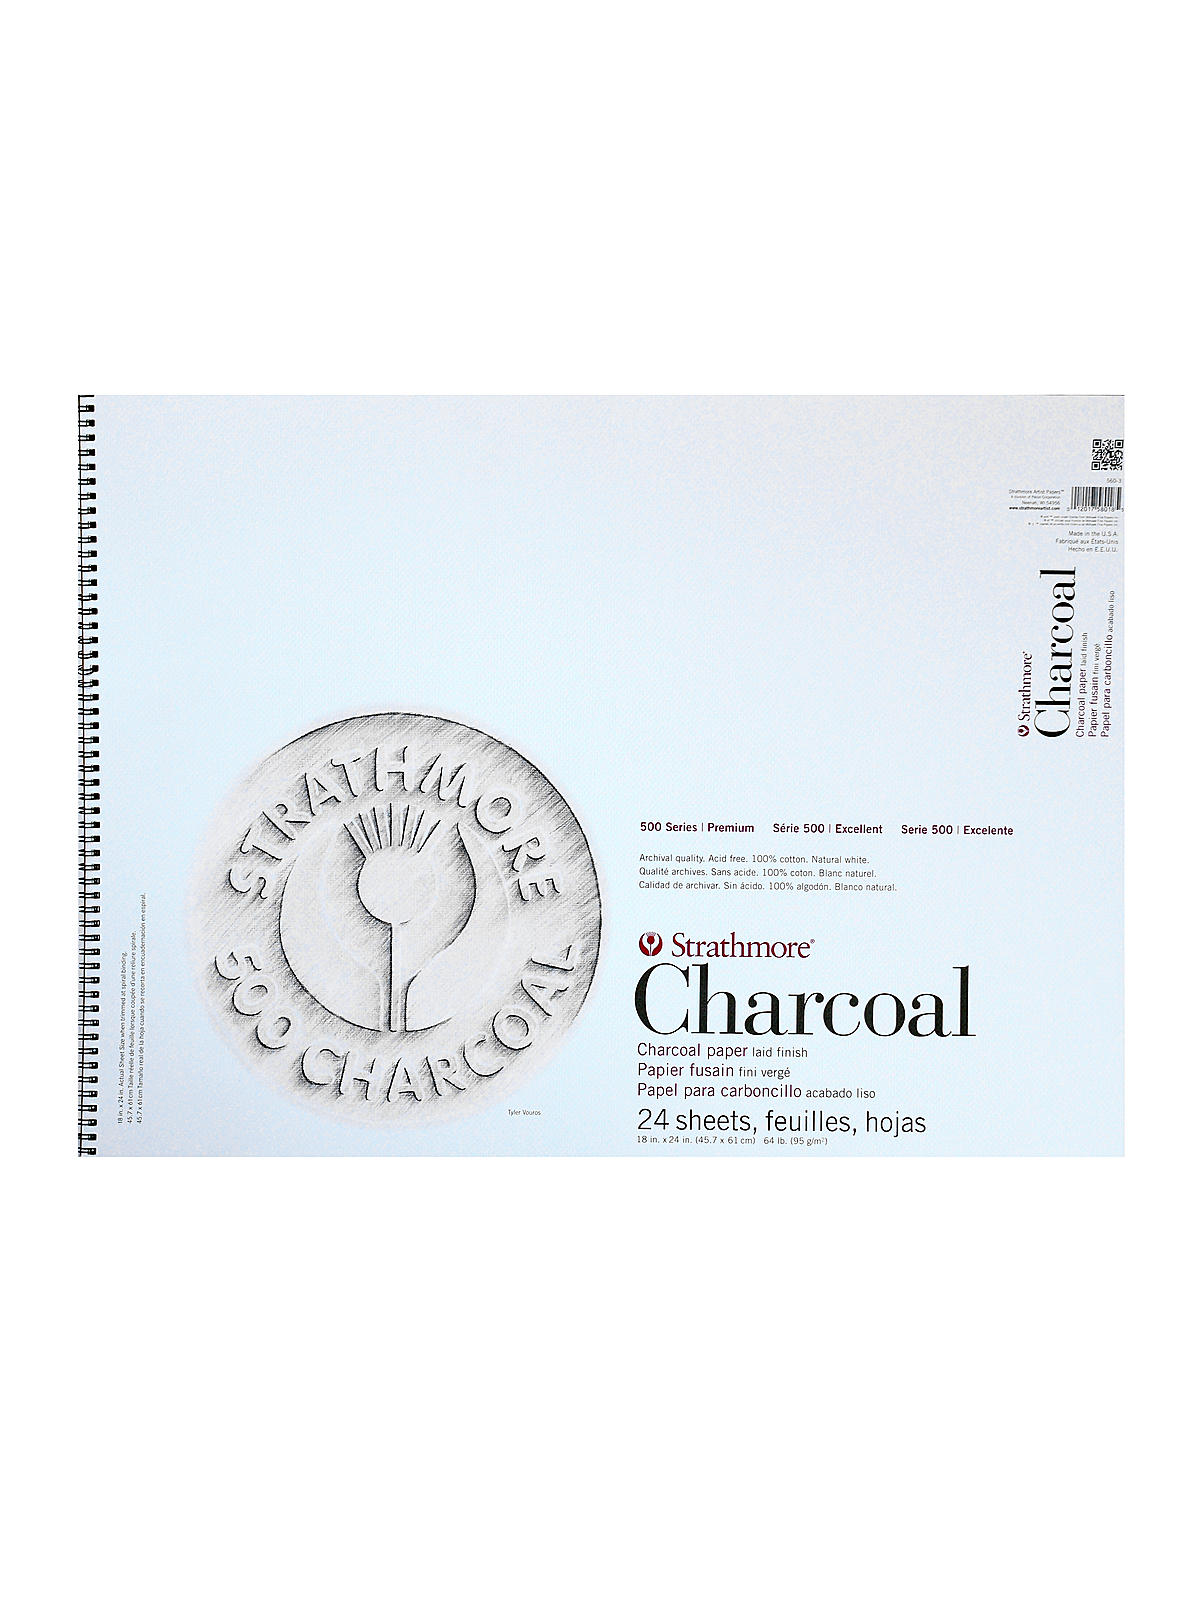 500 Series Charcoal Paper Pads White 18 In. X 24 In.